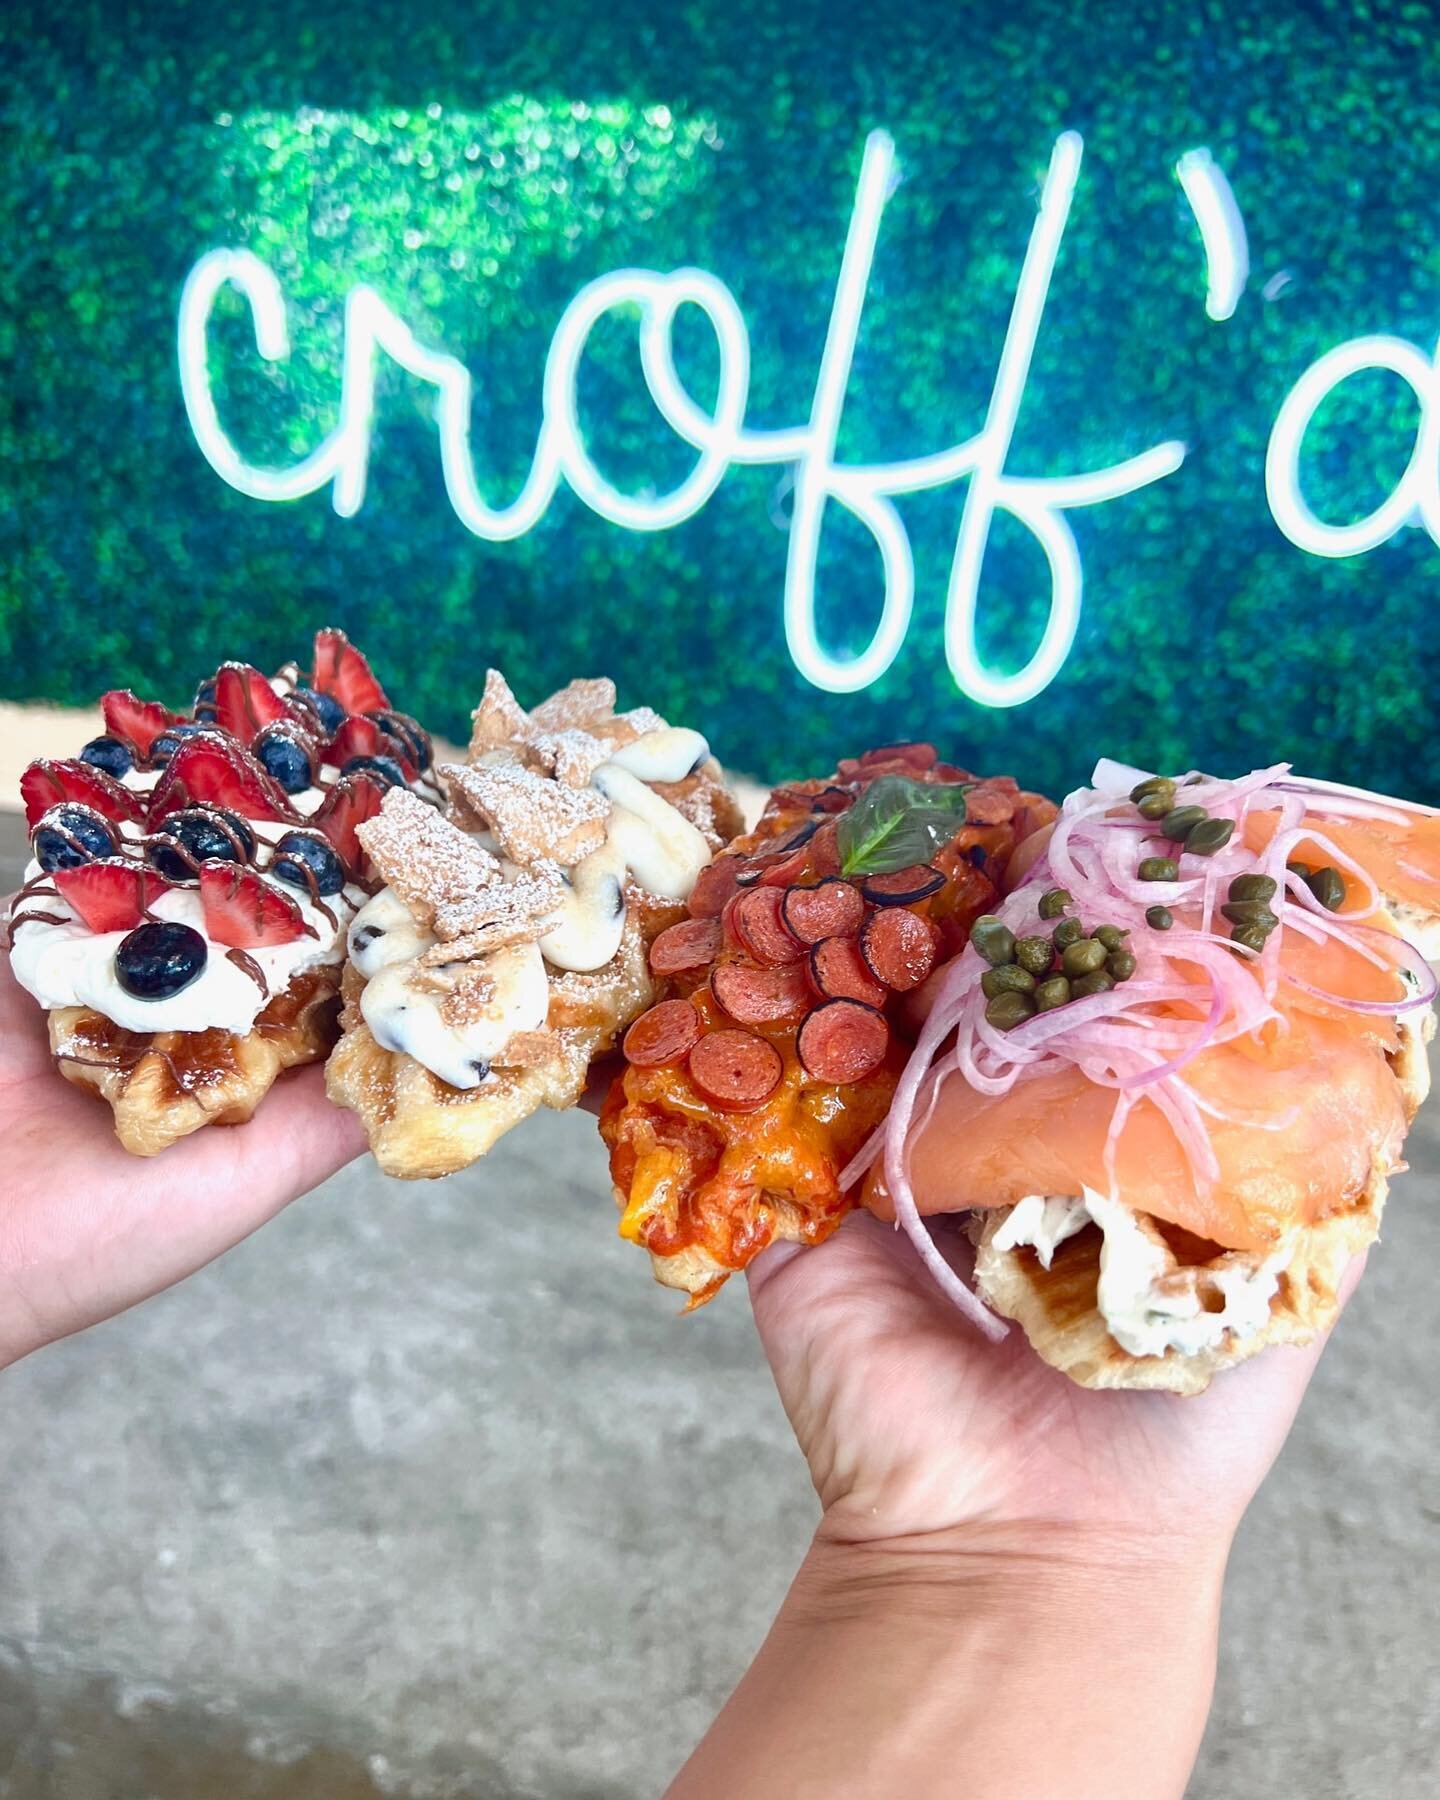 We&rsquo;ve got a whole lineup of deliciousness waiting here for you 🤤 

⏰ Hours:
Thurs 12-8PM
Fri- Sat 12-9PM
Sun 12-8PM
📍Inside @railwayheightsmarket (8200 Washington Ave)
.
.
.
.
.
#houstondatenight #htxfood #htxfoods #365houston #ighouston #hou